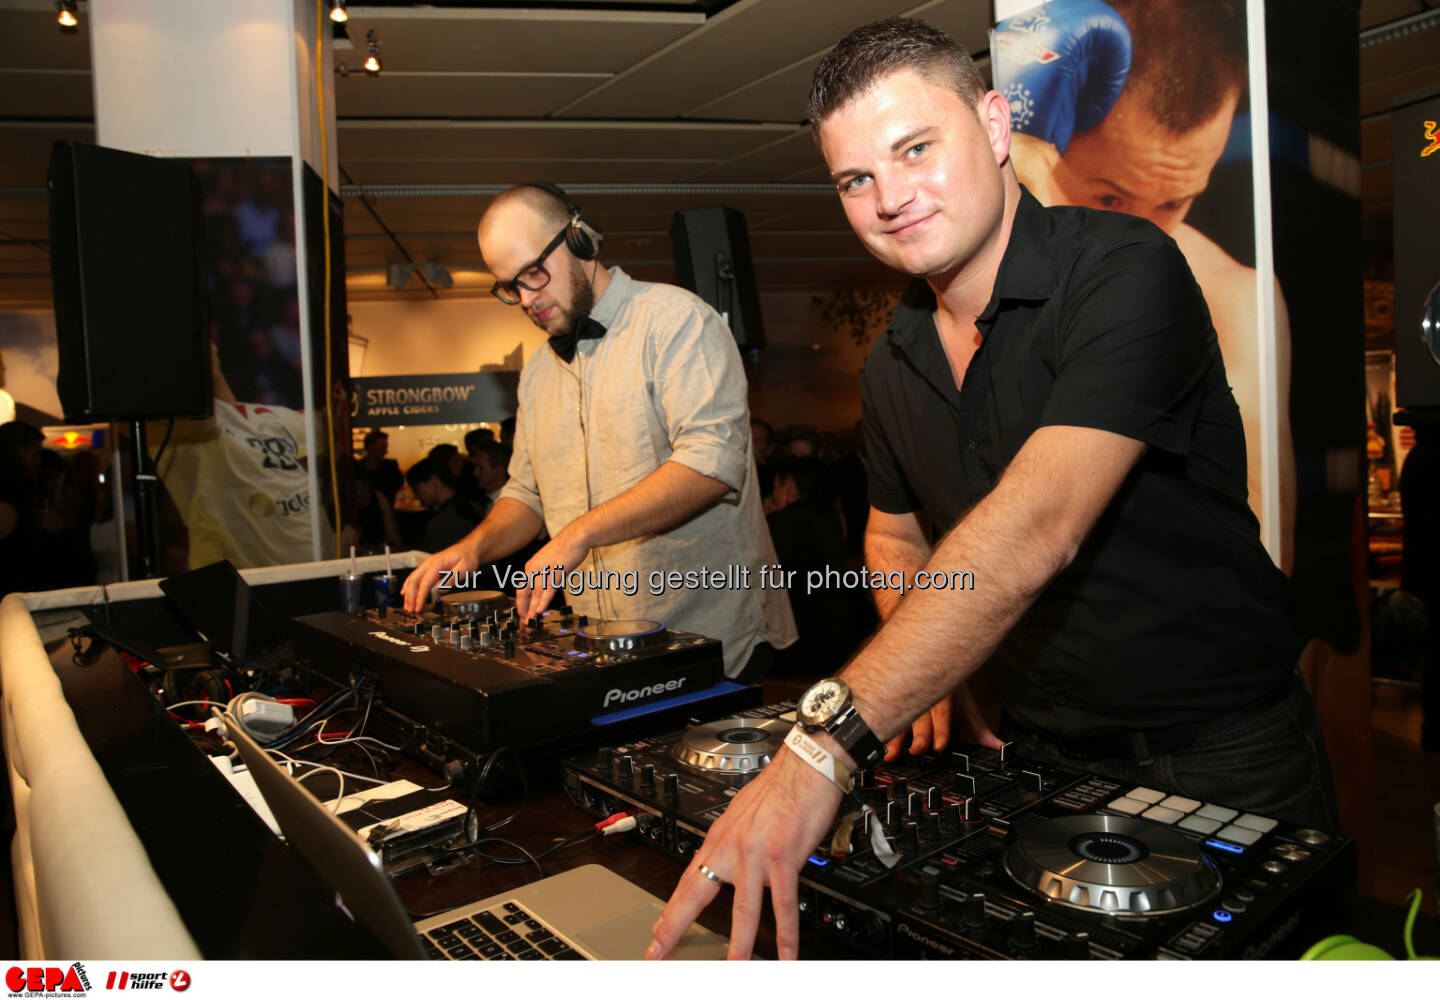 Die DJ's : Photo: GEPA pictures/ Walter Luger